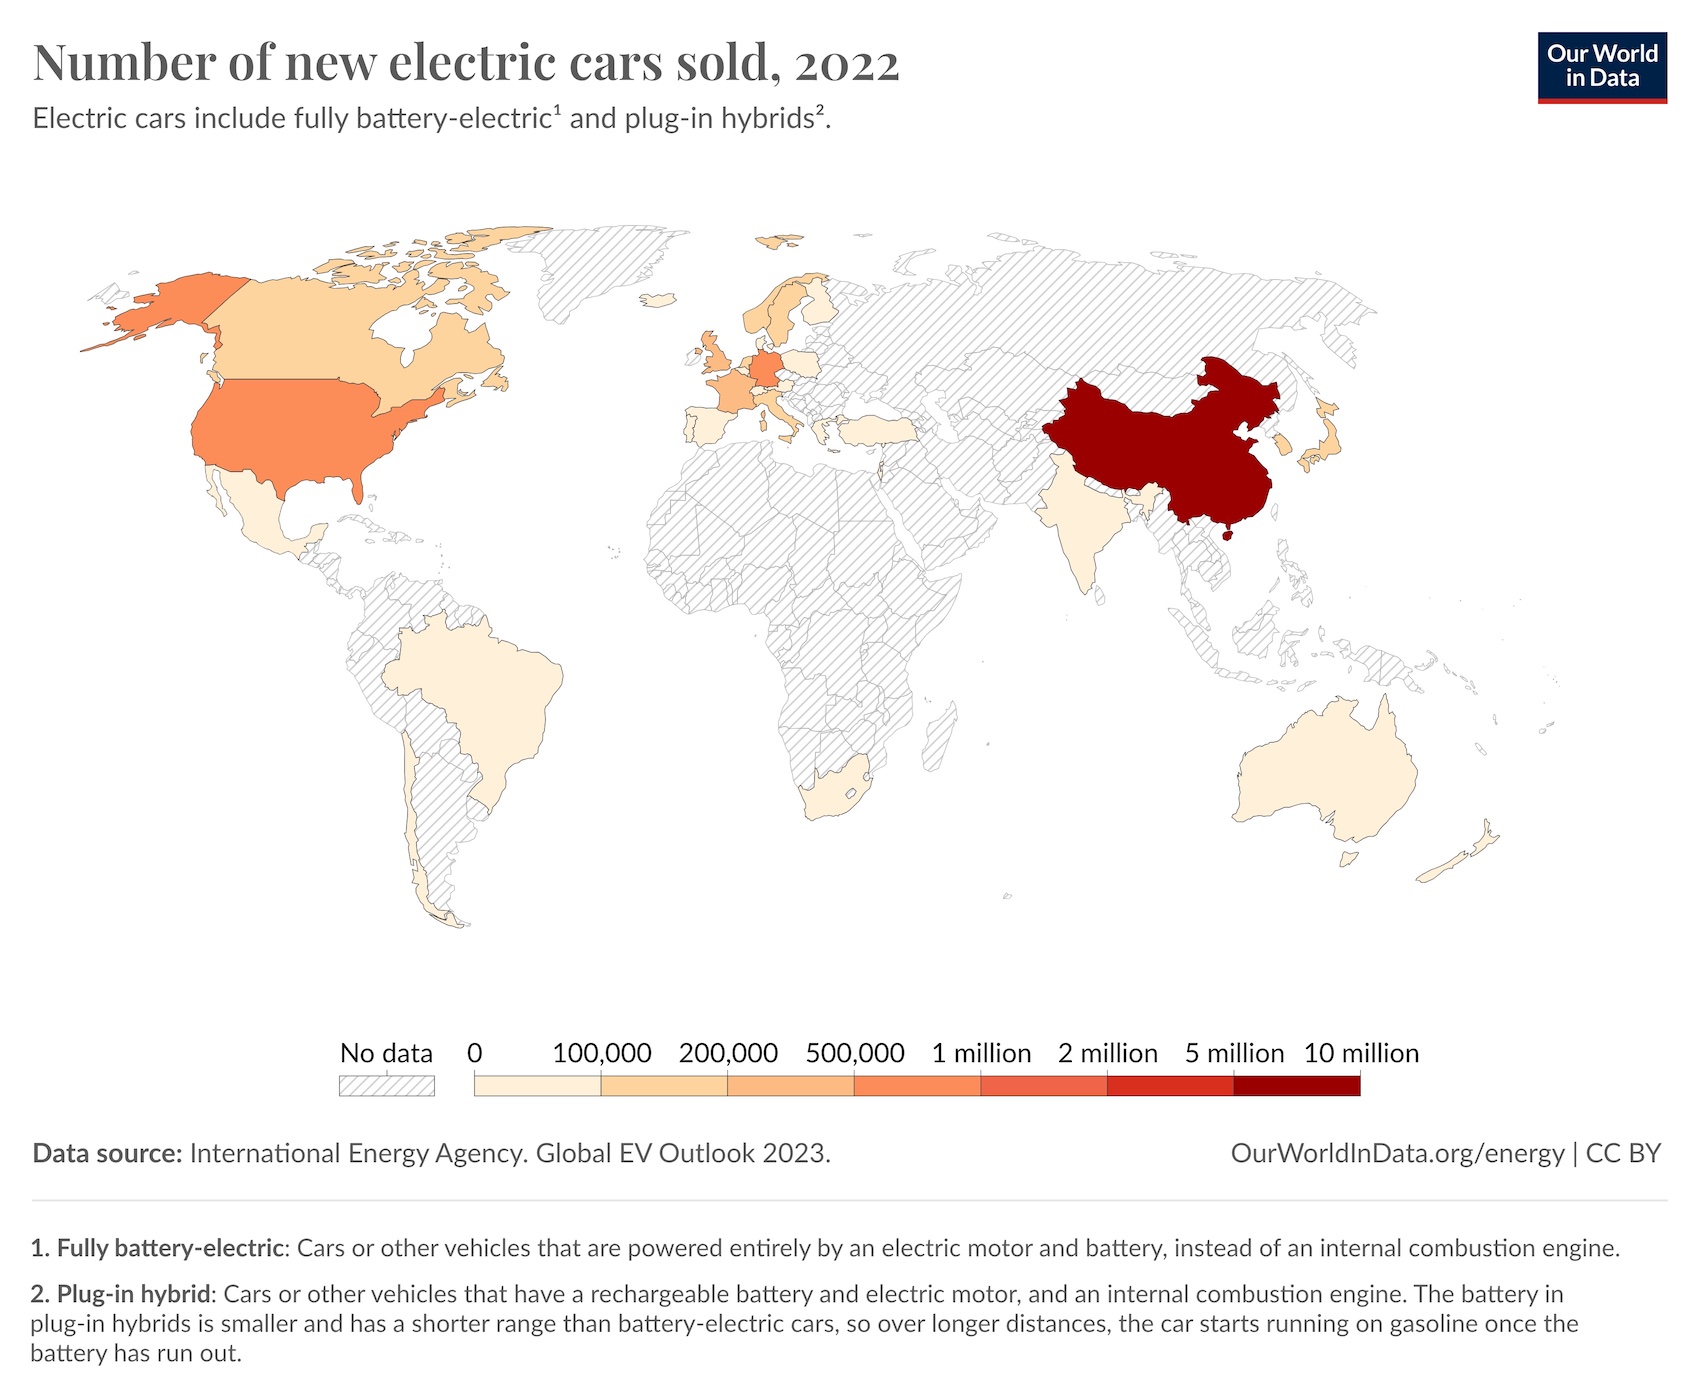 World map illustrating the number of new electric cars by country in 2022, with varying shades indicating the quantity sold, ranging from no data to over 10 million vehicles.